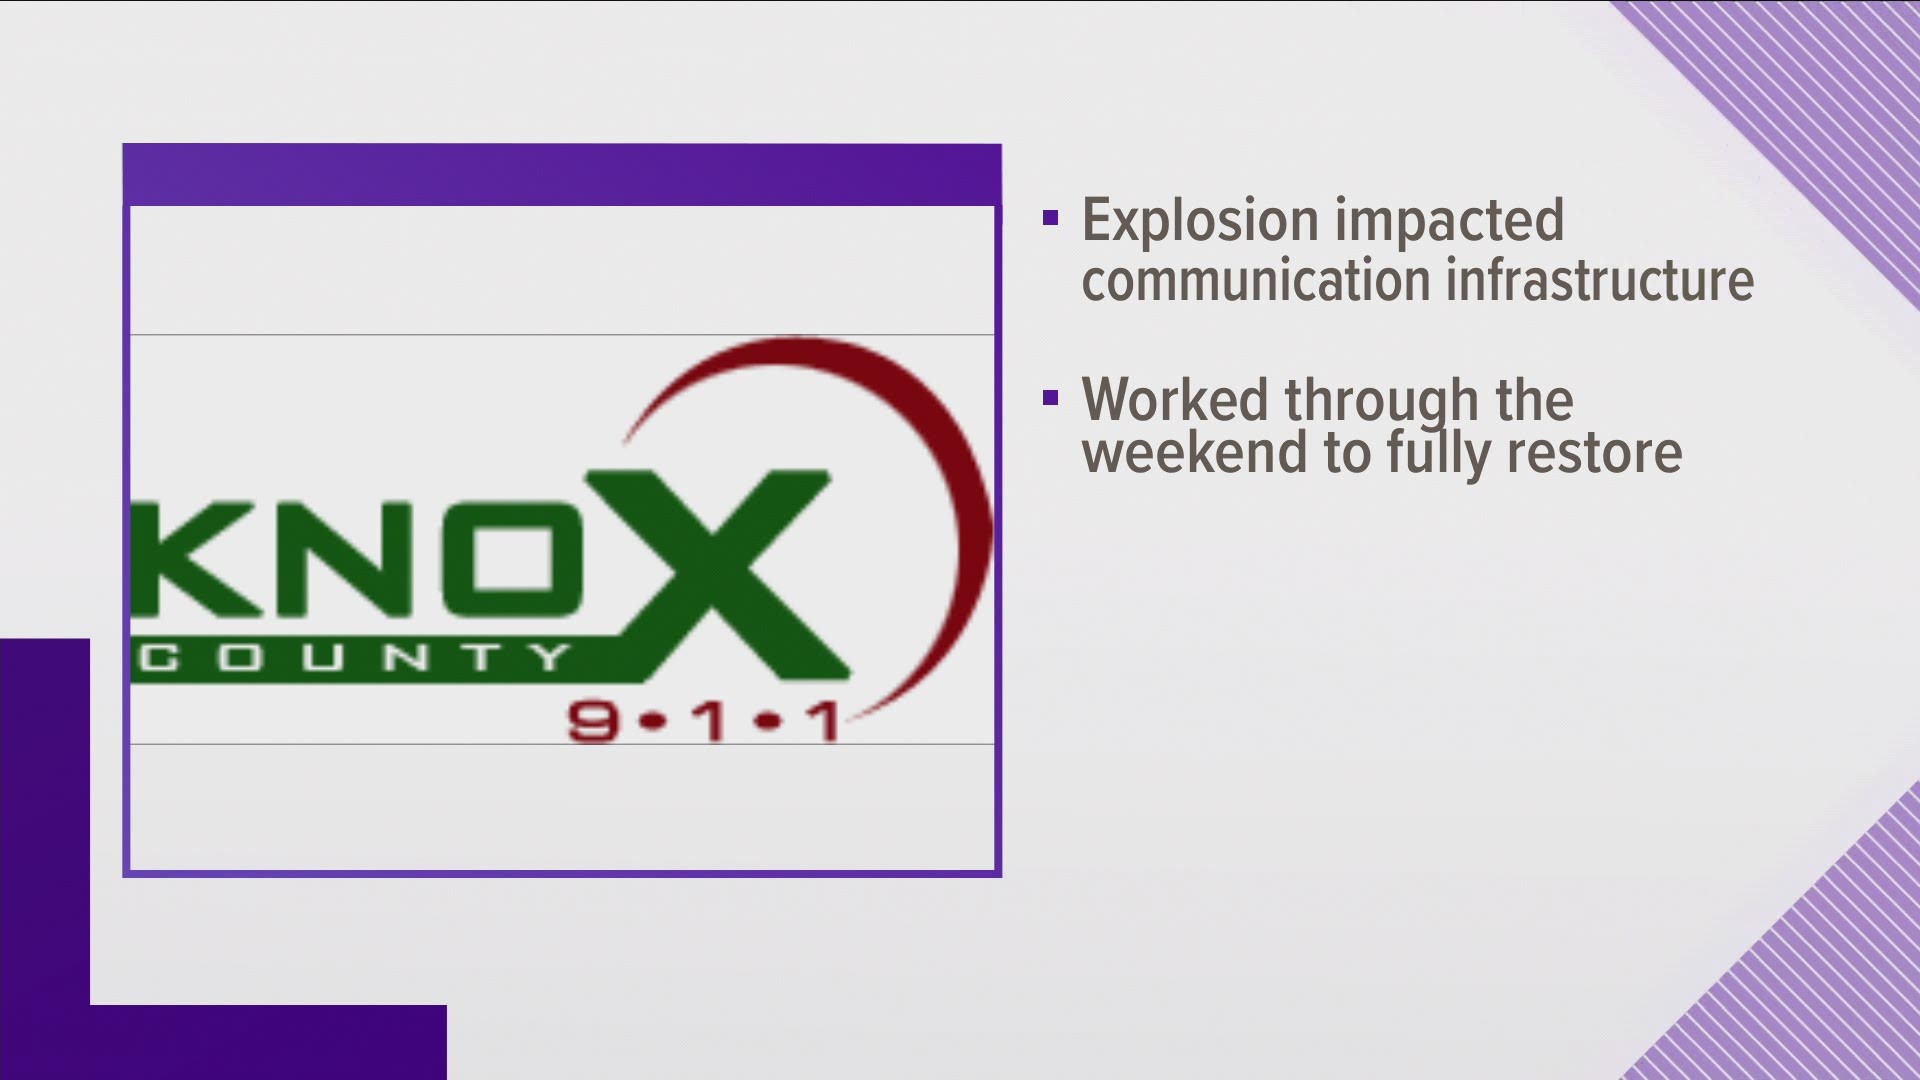 Knox County's E911 center said Monday service has been fully restored after interruptions linked to the Friday Nashville bombing.